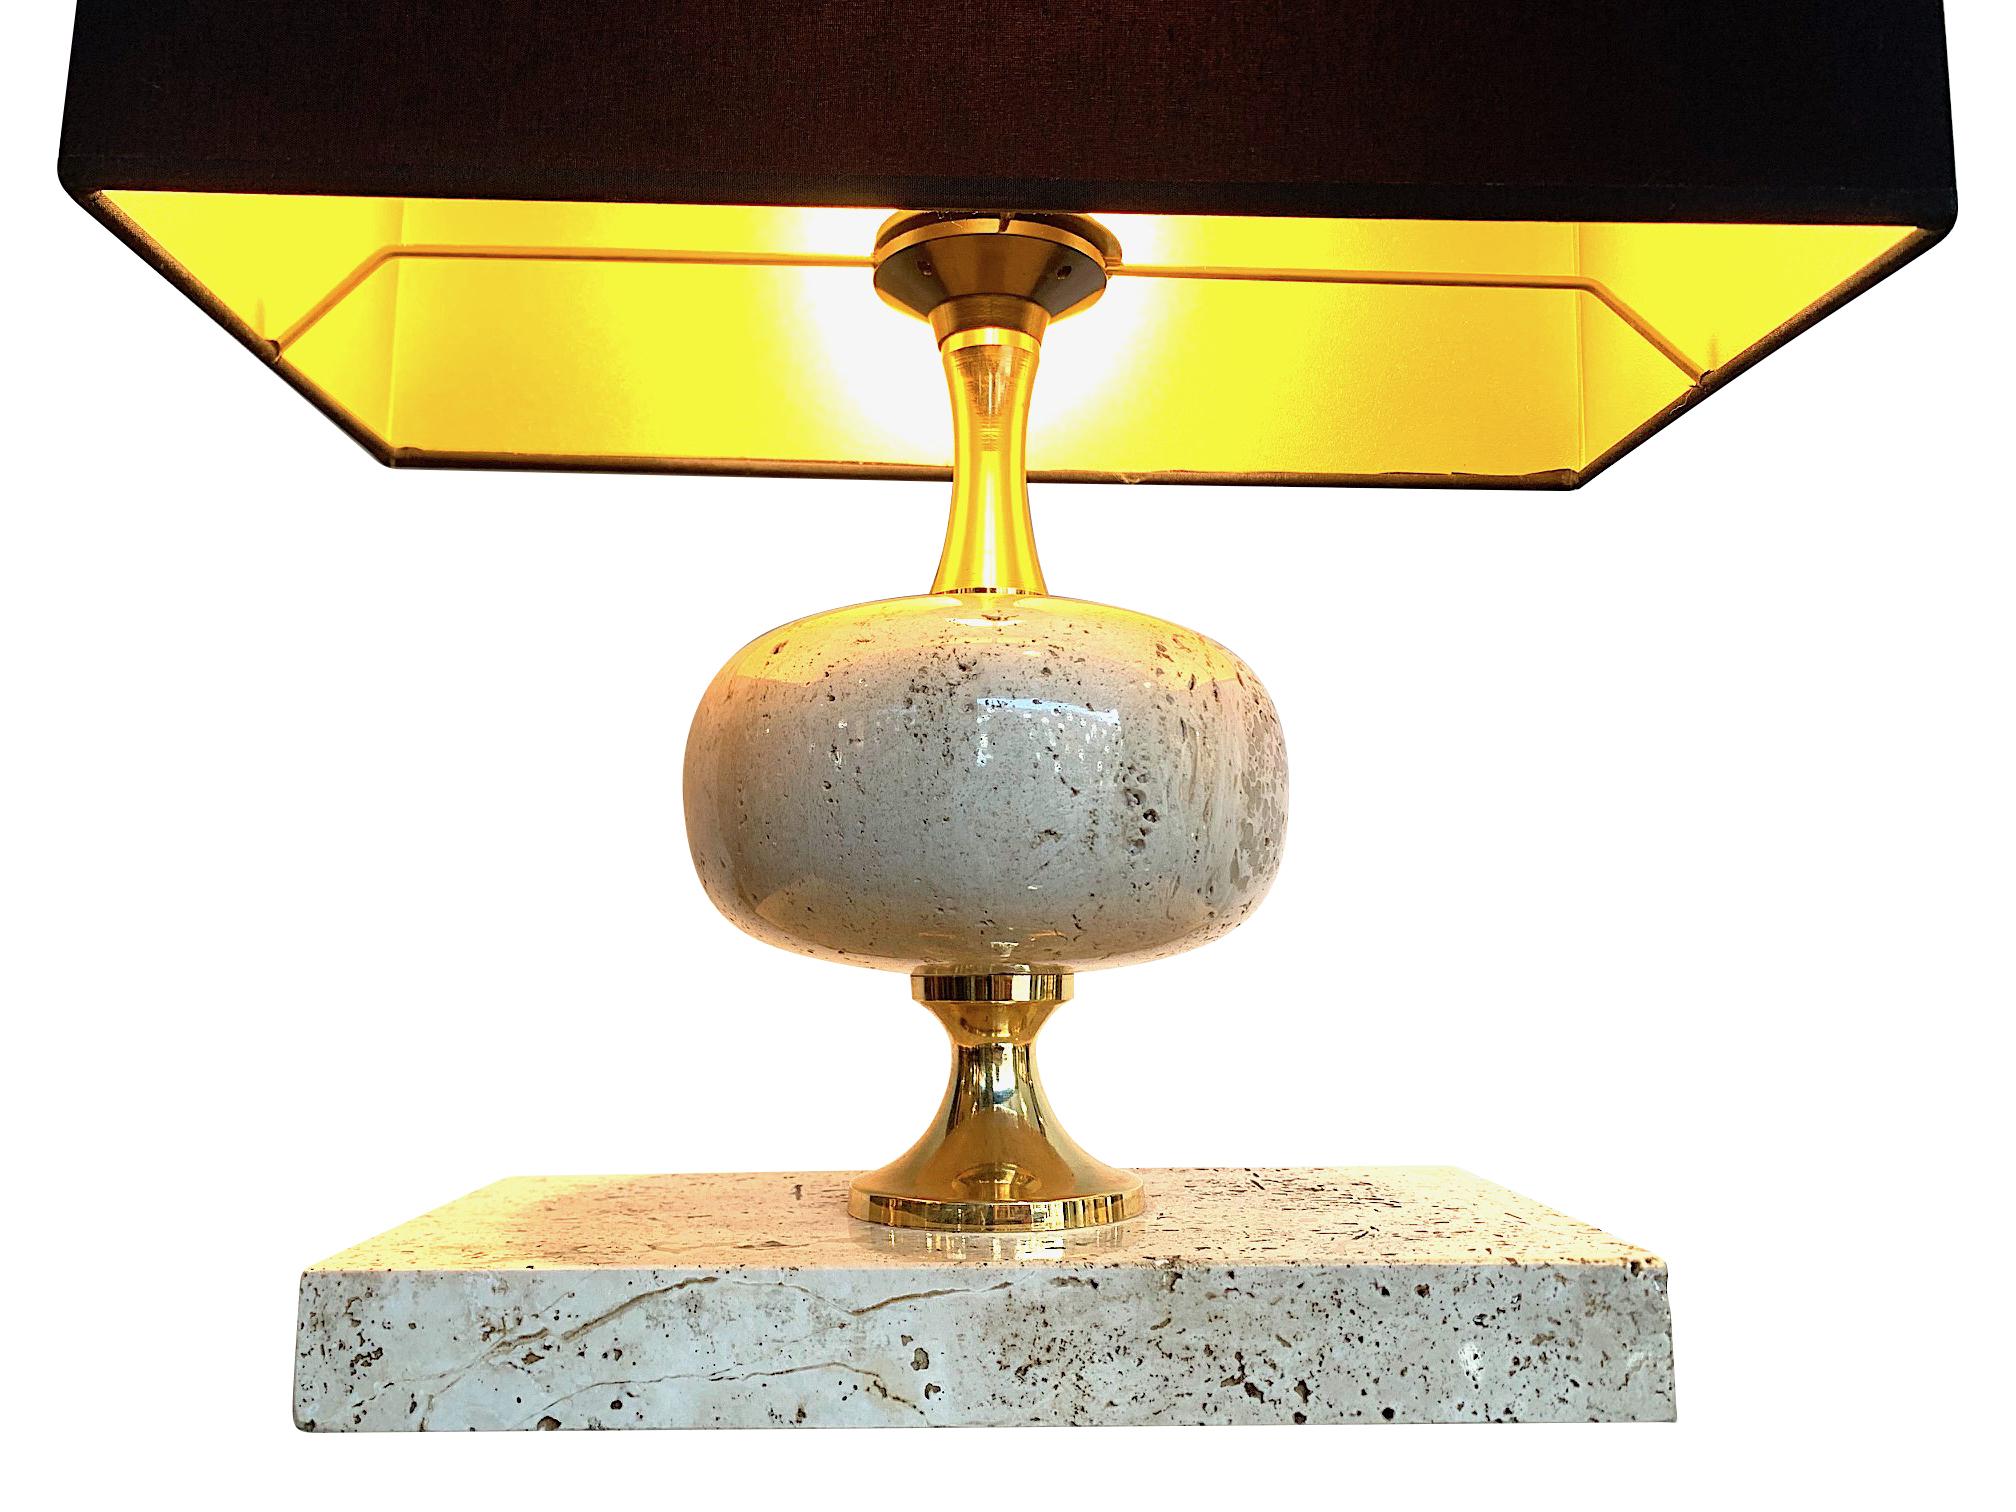 French 1970s Maison Barbier Travertine and Brass Lamps with New Bespoke Shade